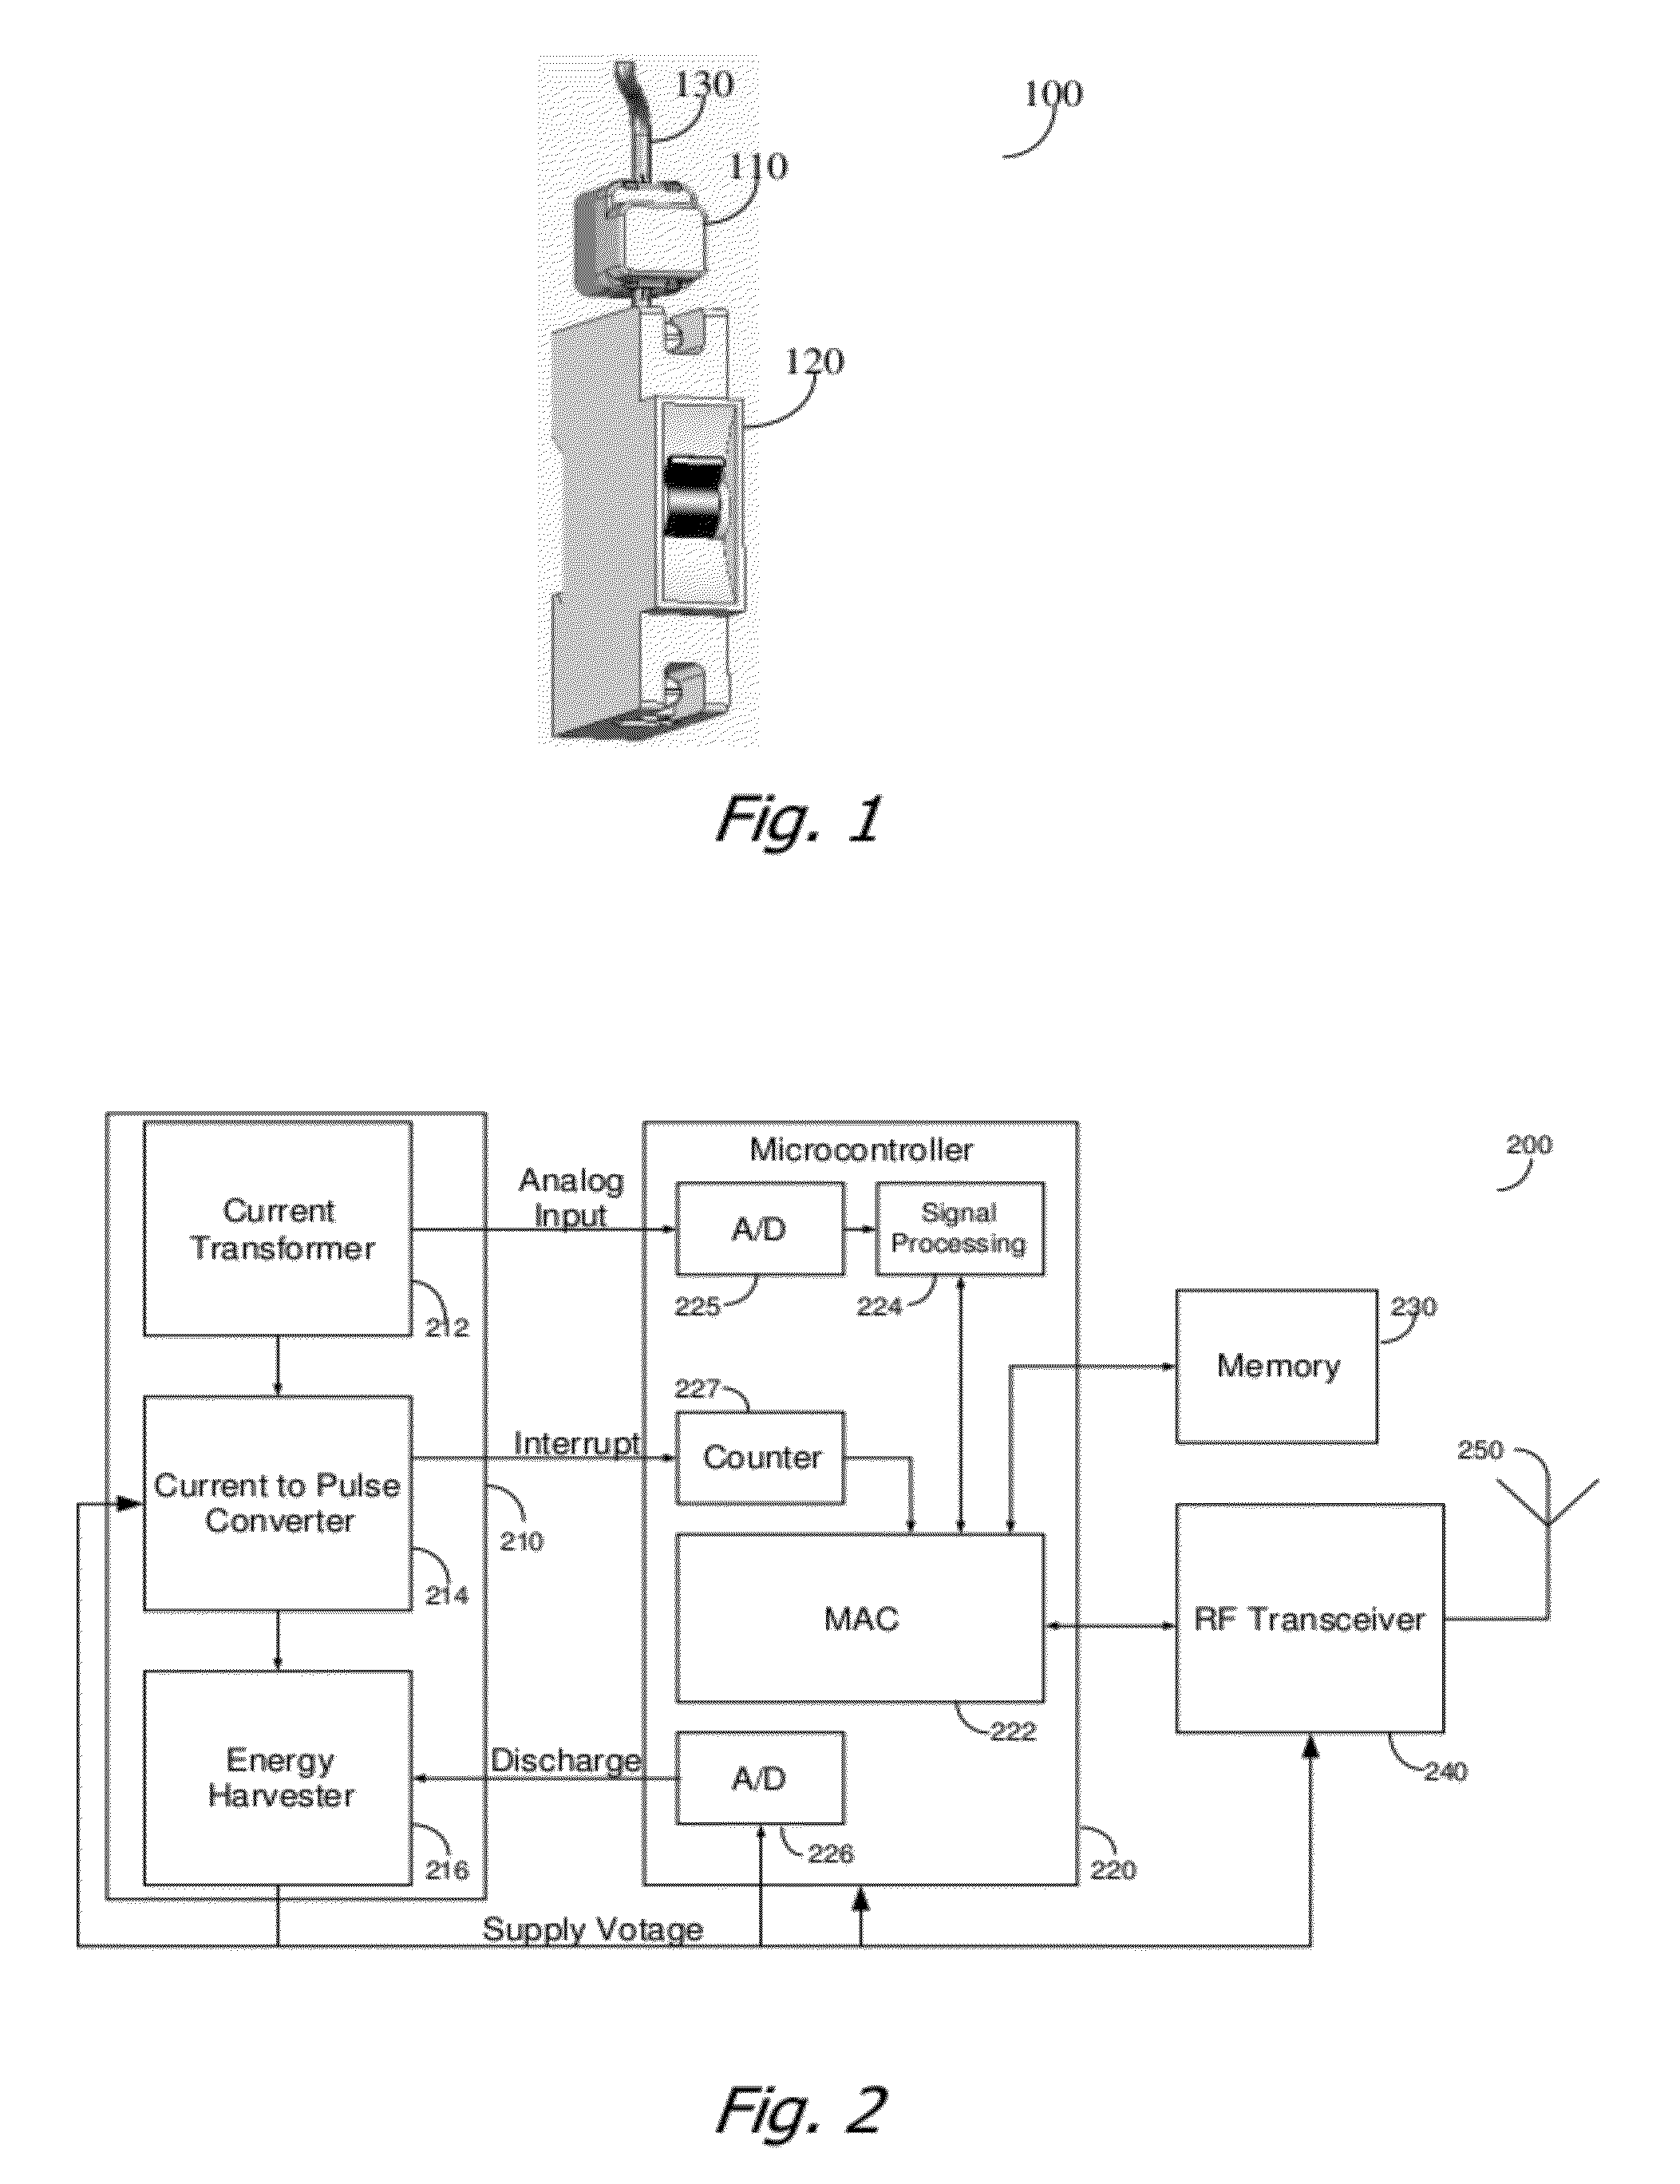 Distributed Electricity Metering System